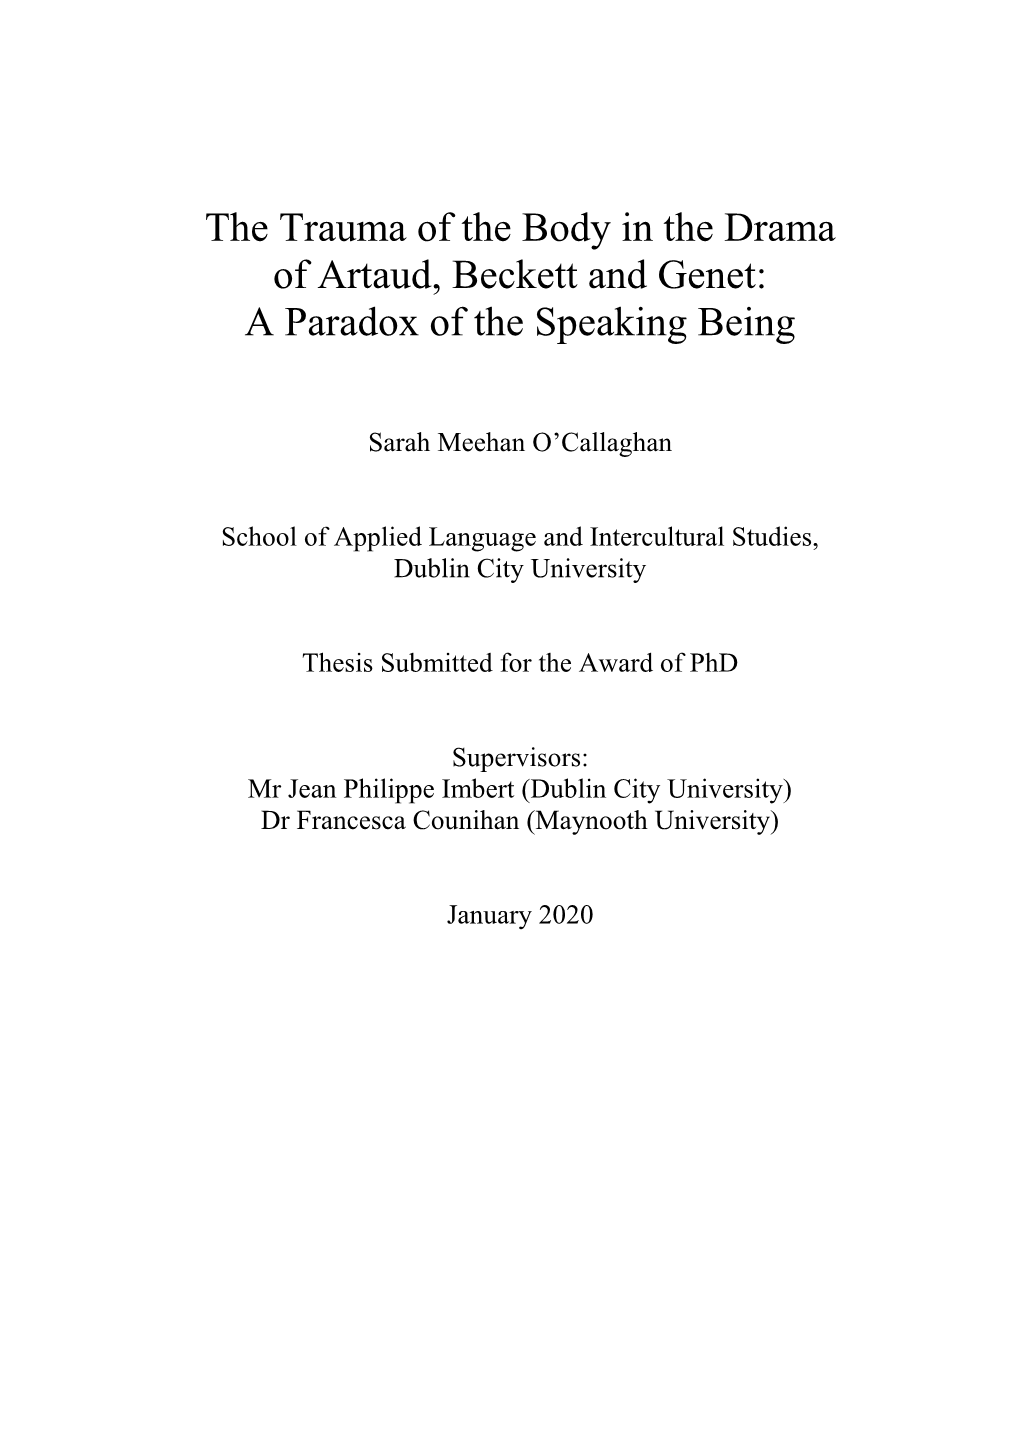 The Trauma of the Body in the Drama of Artaud, Beckett and Genet: a Paradox of the Speaking Being